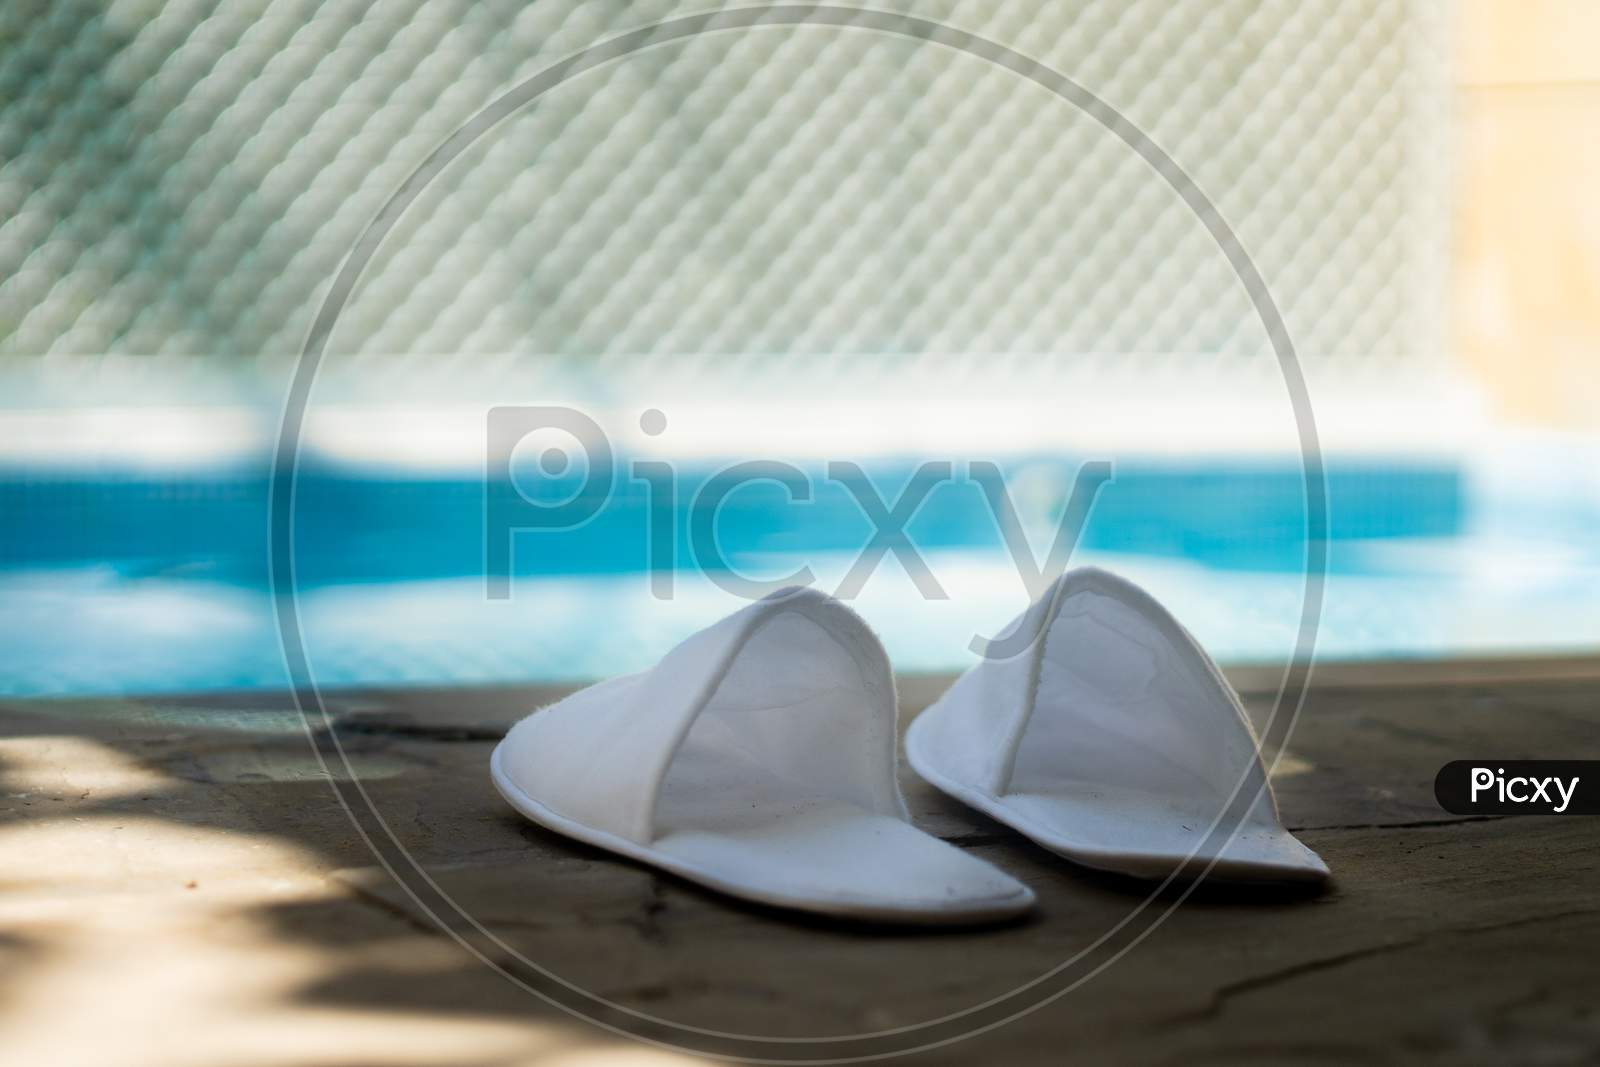 White Cloth Carpet Sippers Placed On The Side Of A Out Of Focus Pool With Light Reflections Playing In The Distance Showing The Luxury And Relaxation Of A Expensive Resort